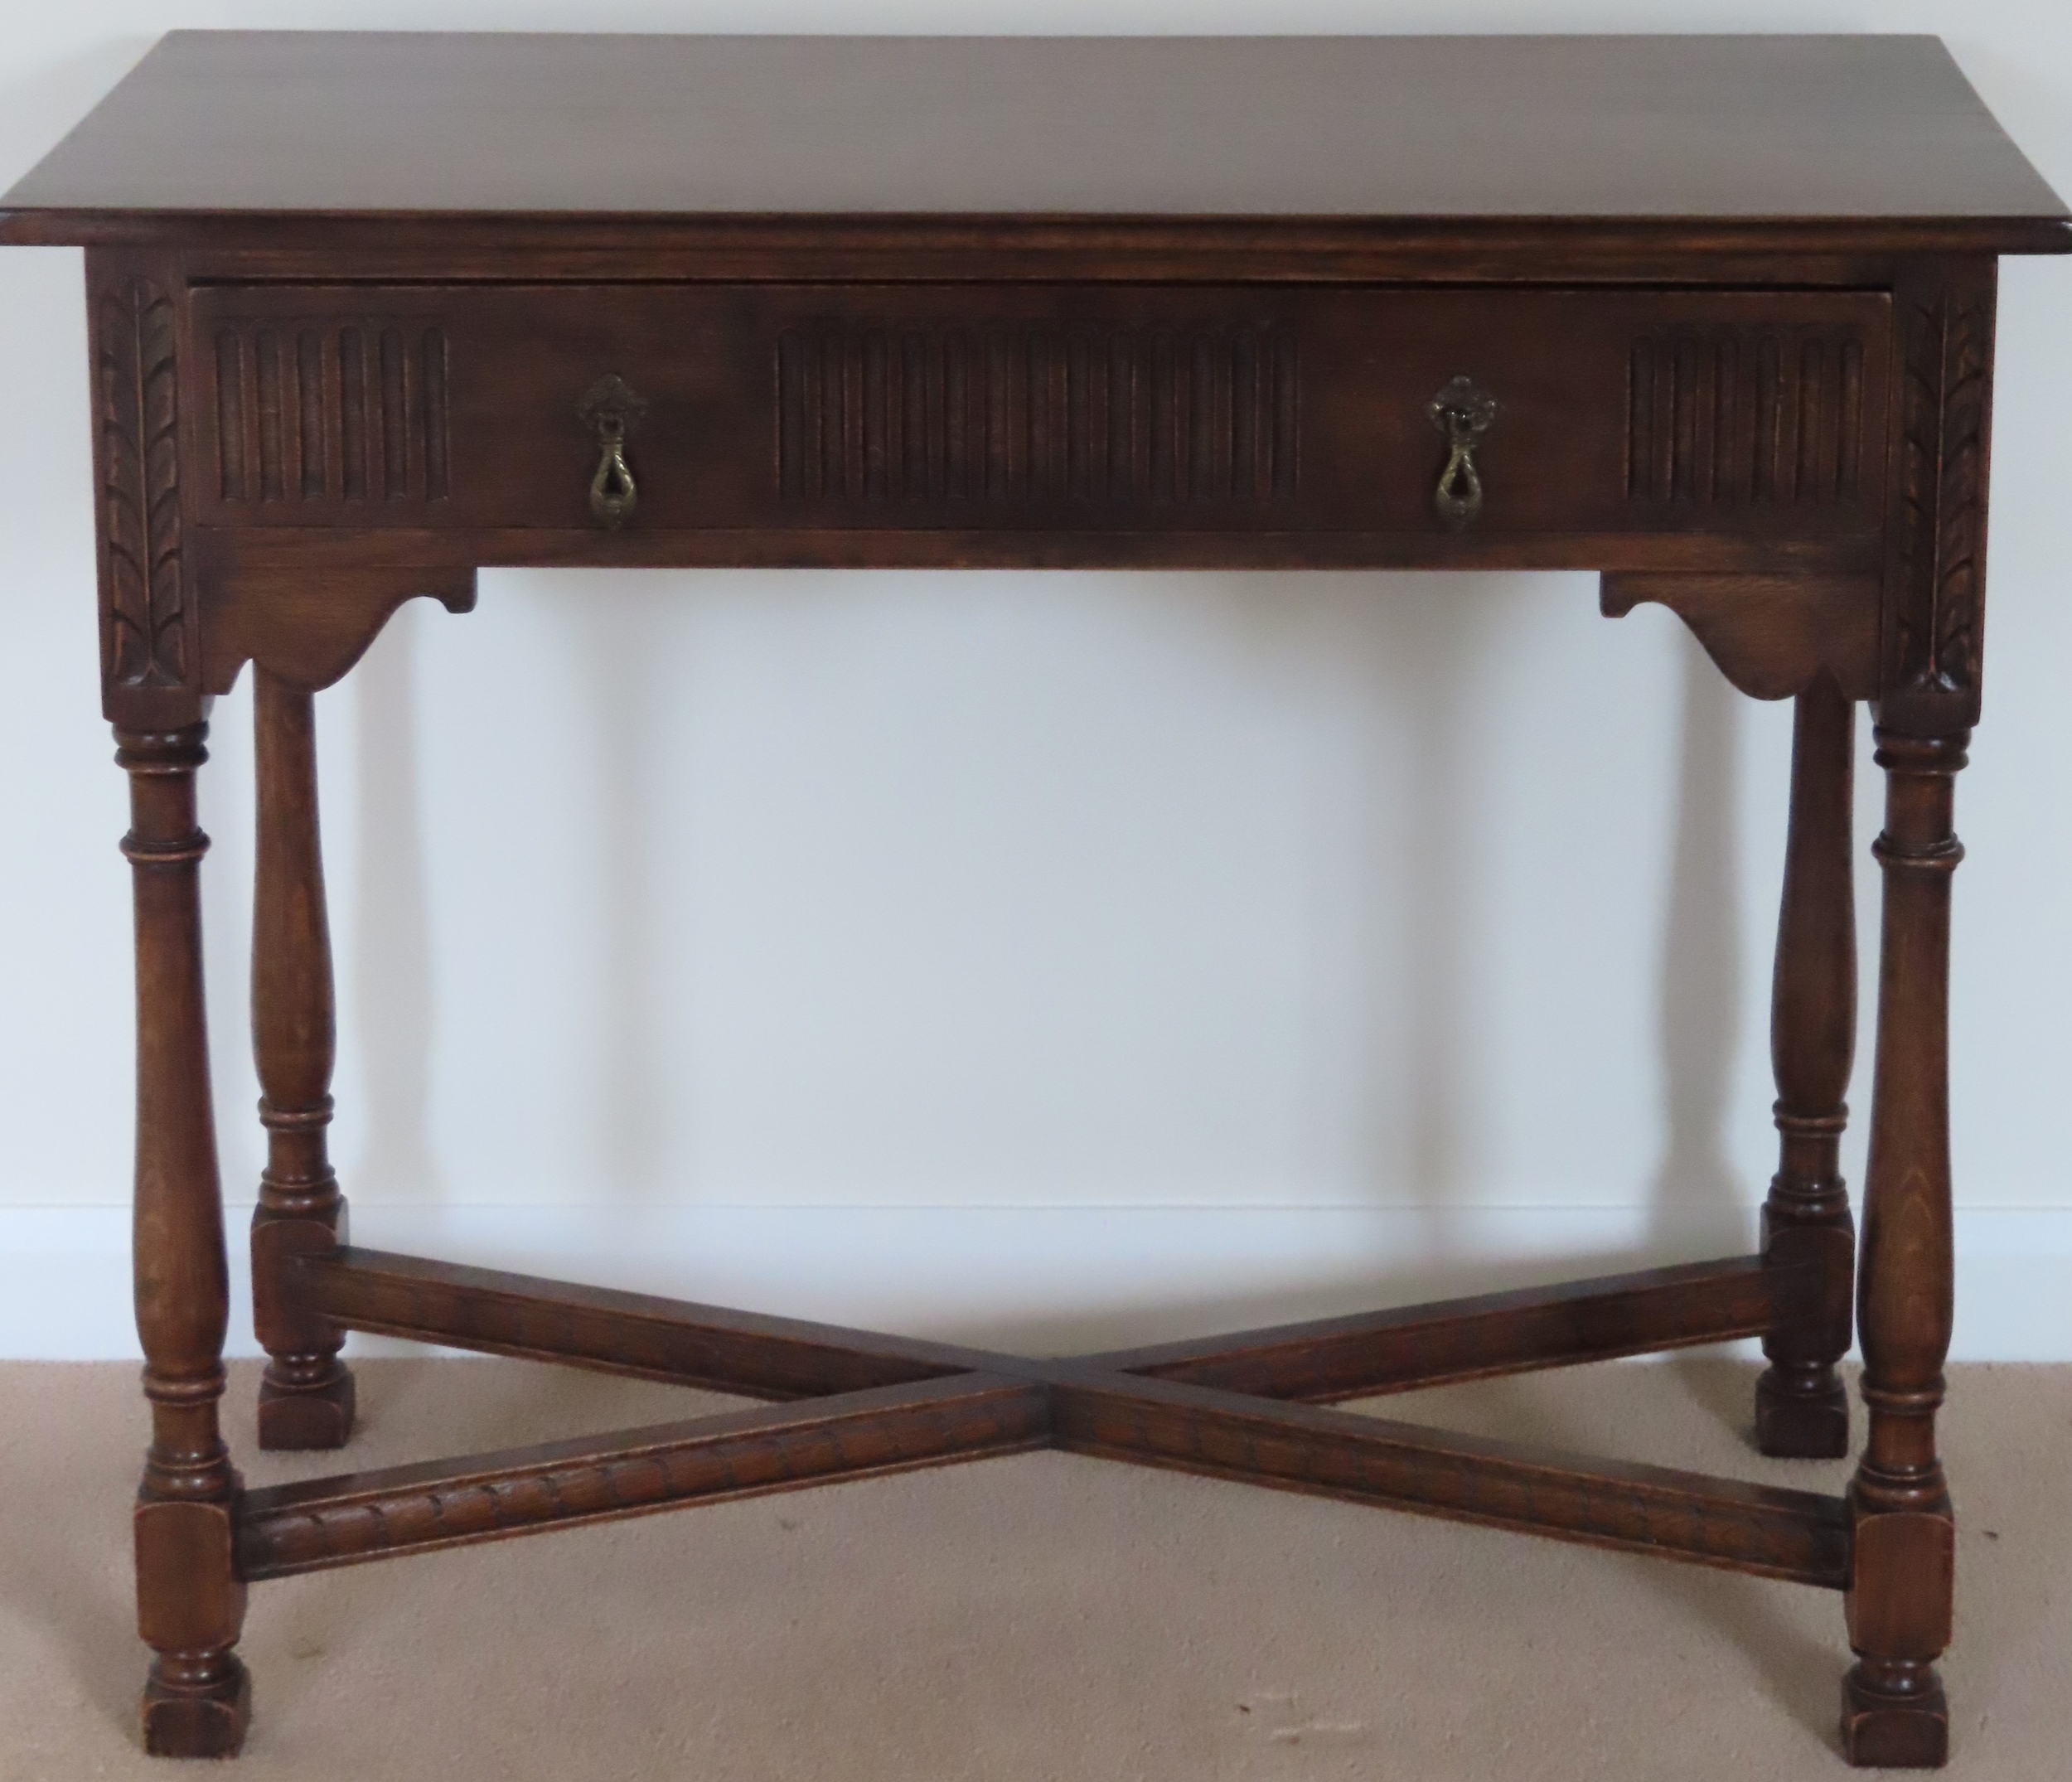 20th century oak priory style single drawer side table on stretchered supports. Approx. 76 x 91 x